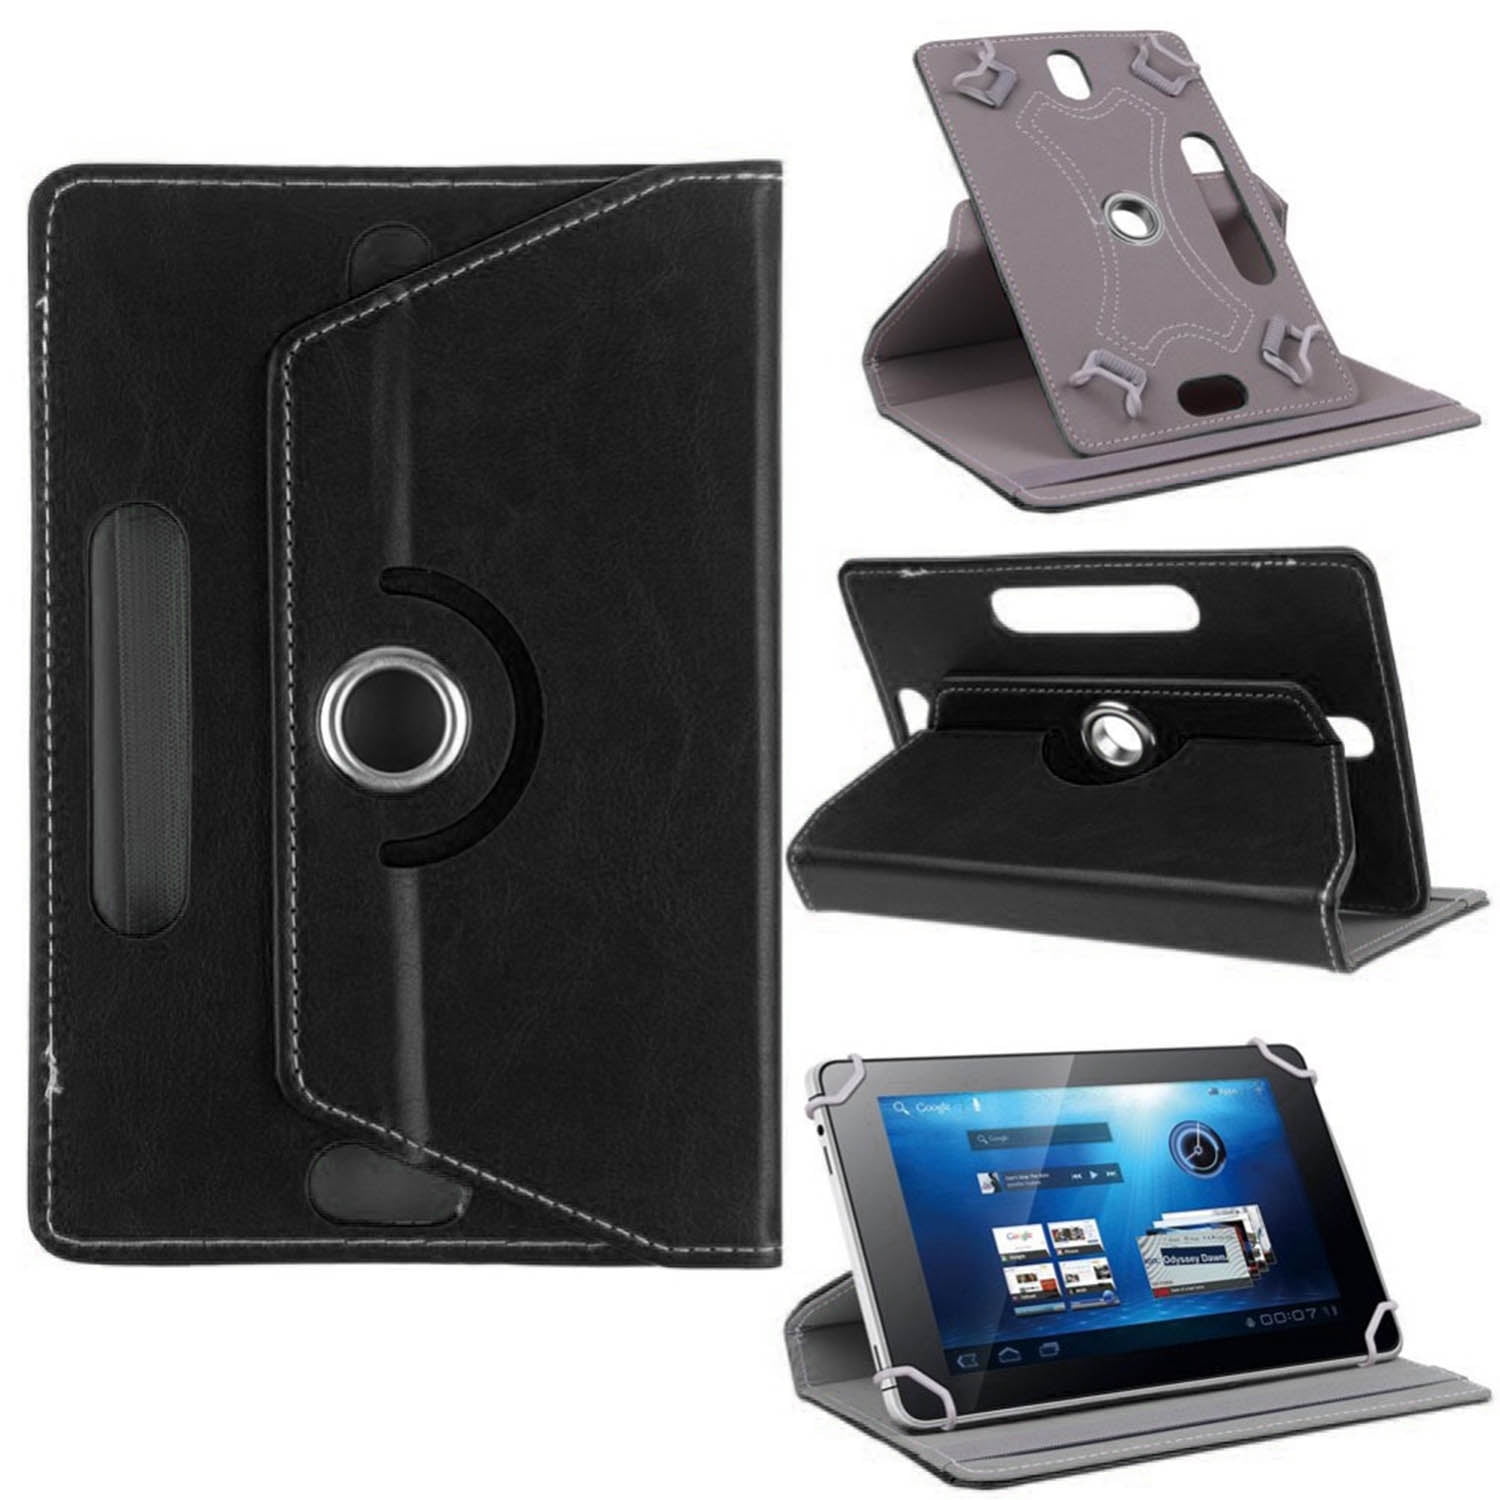 Worden schipper demonstratie CoverON Universal 7.9 - 9 inch Screen Size Tablet Case, Multi-Angle Stand  Folio Adjustable Protective Cover Compatiable for iPad mini Samsung Galaxy  Tab Acer Lenovo - PU Leather Holder Band (Black) - Walmart.com